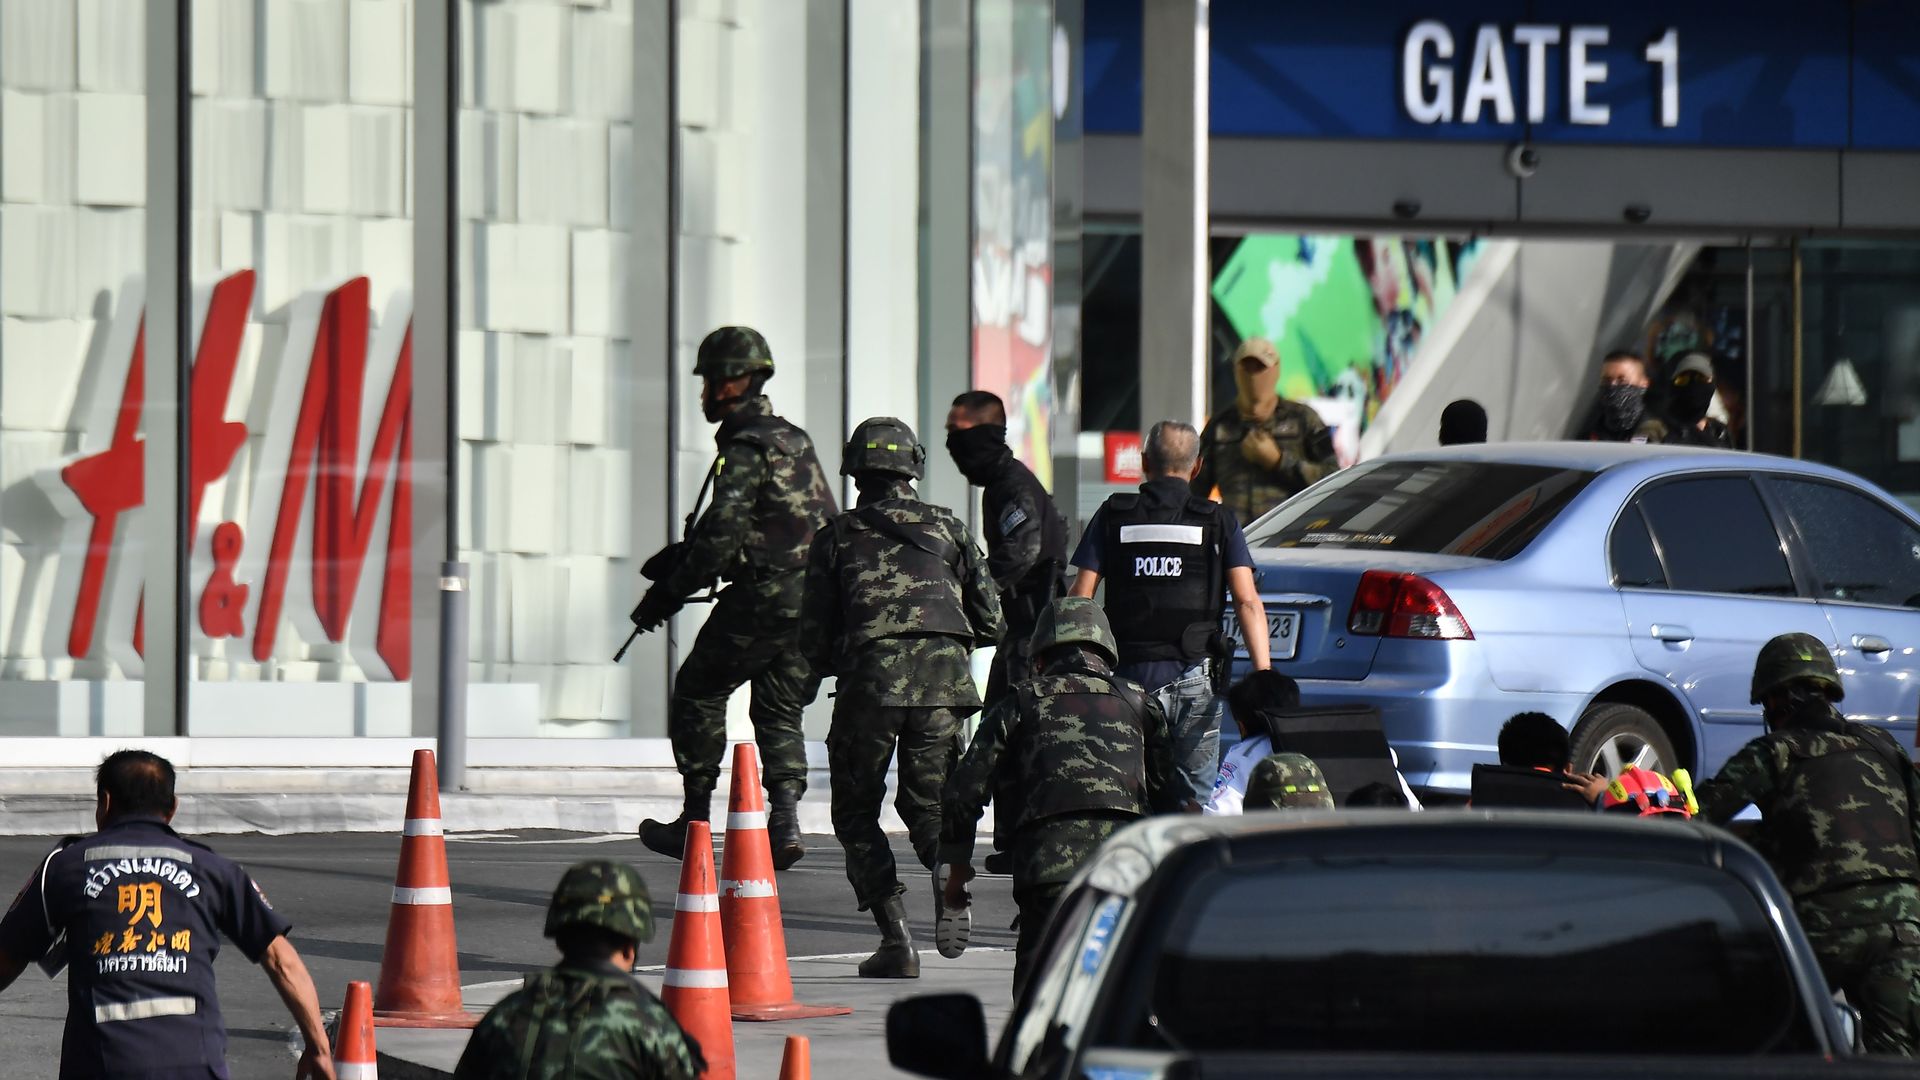 Security personnel prepare to enter the Terminal 21 mall, where a mass shooting took place